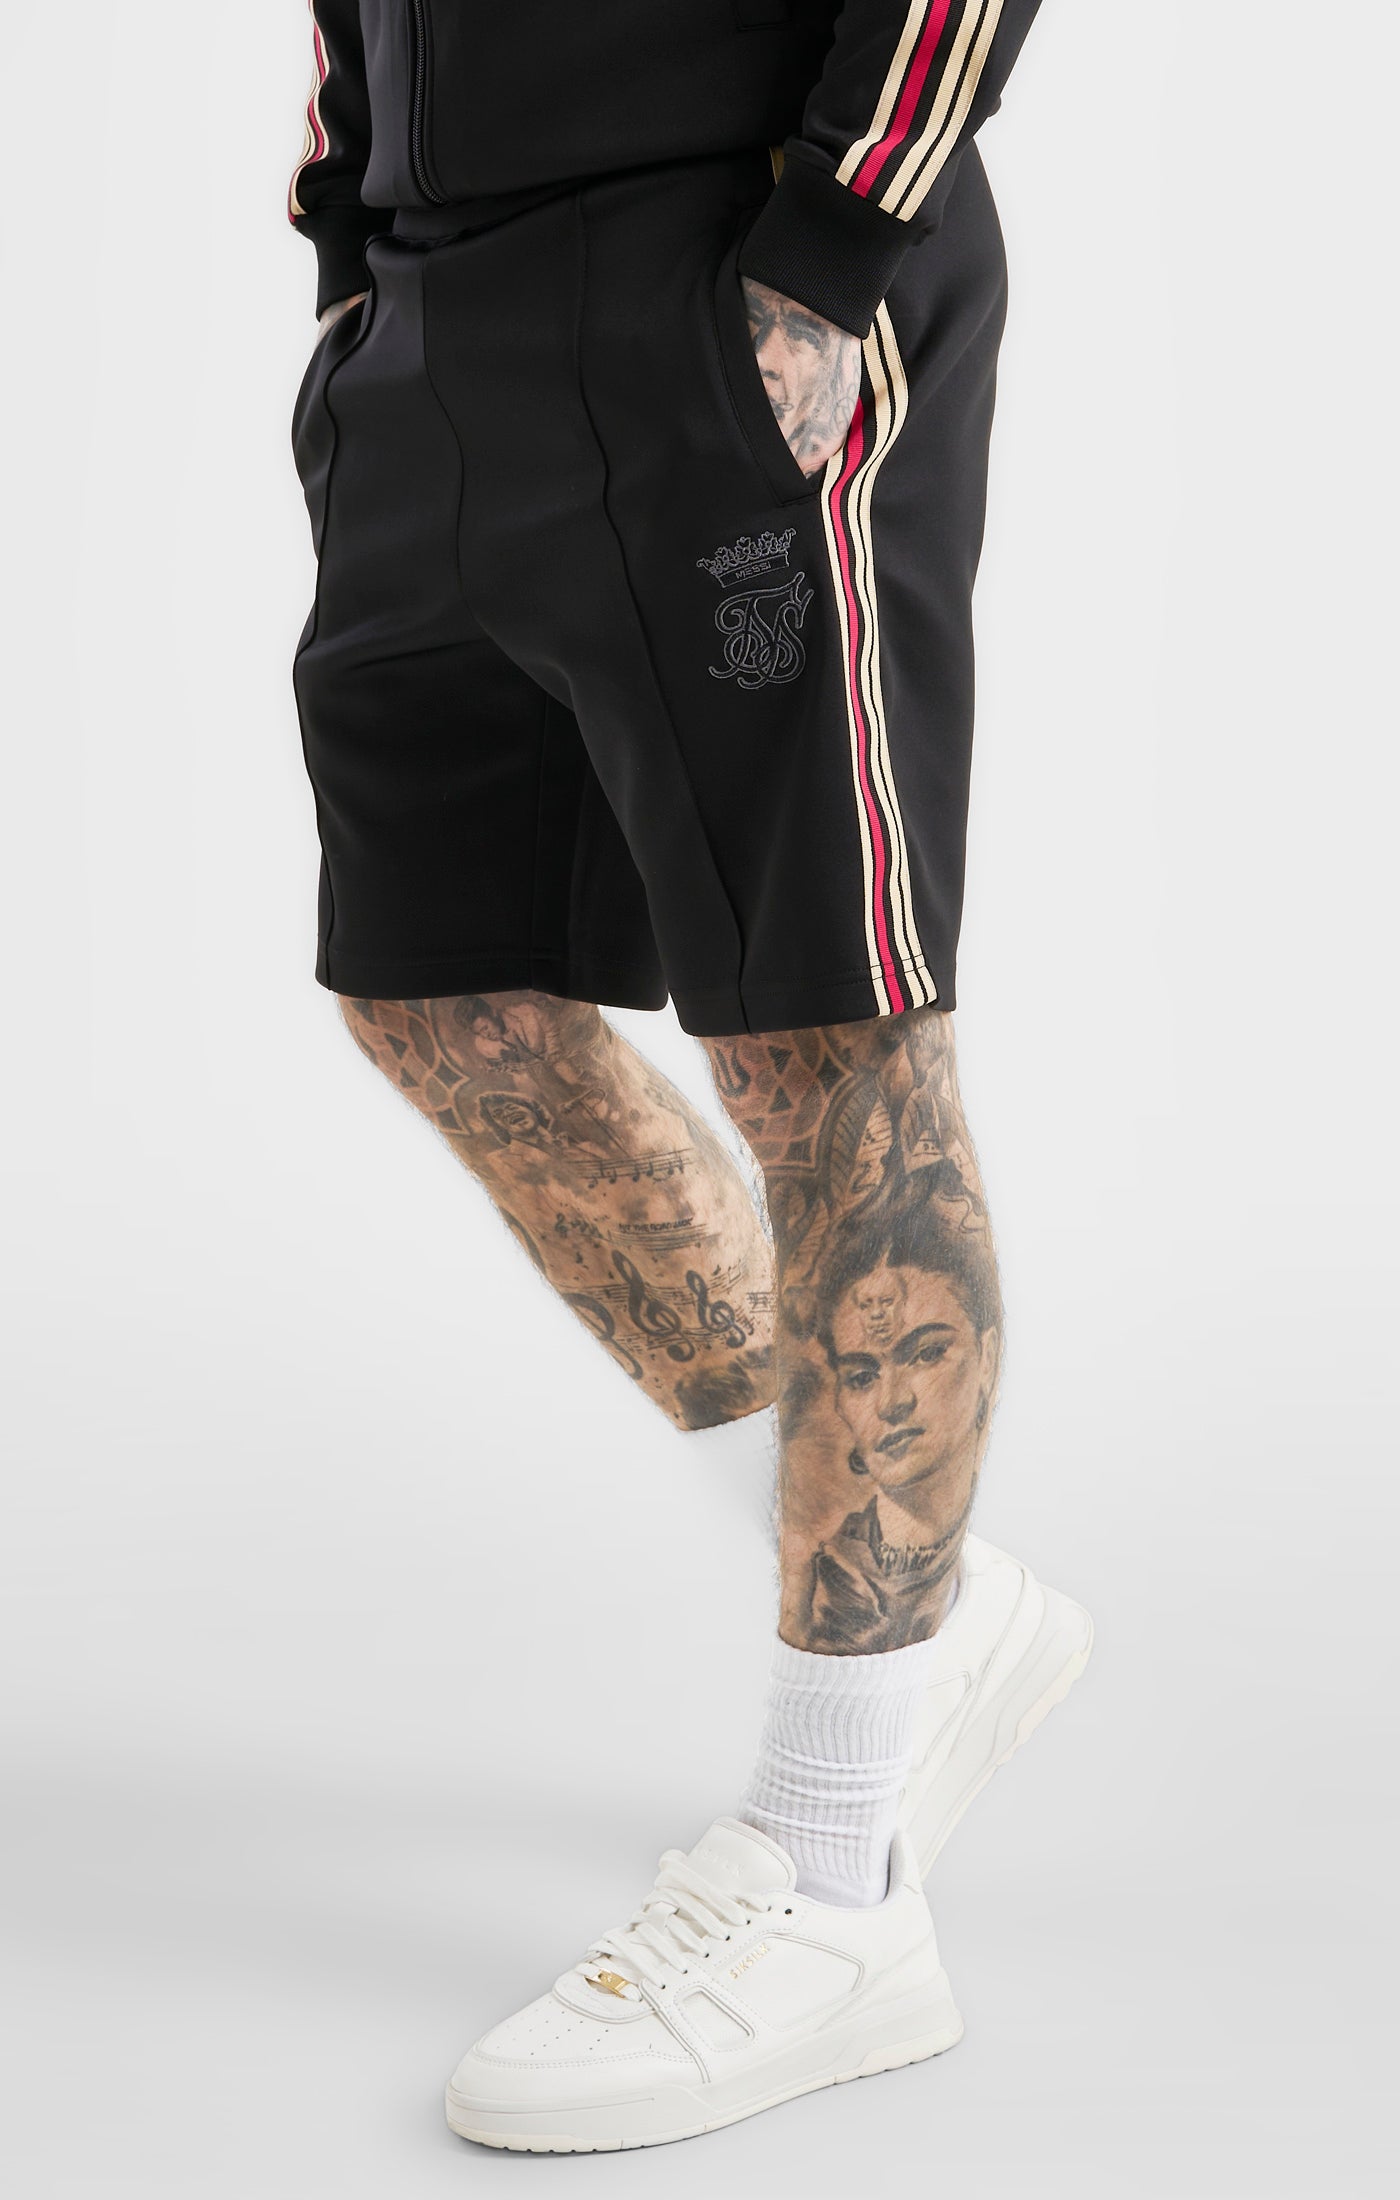 Load image into Gallery viewer, Messi x SikSilk Loose Fit Elasticated Shorts - Black (1)